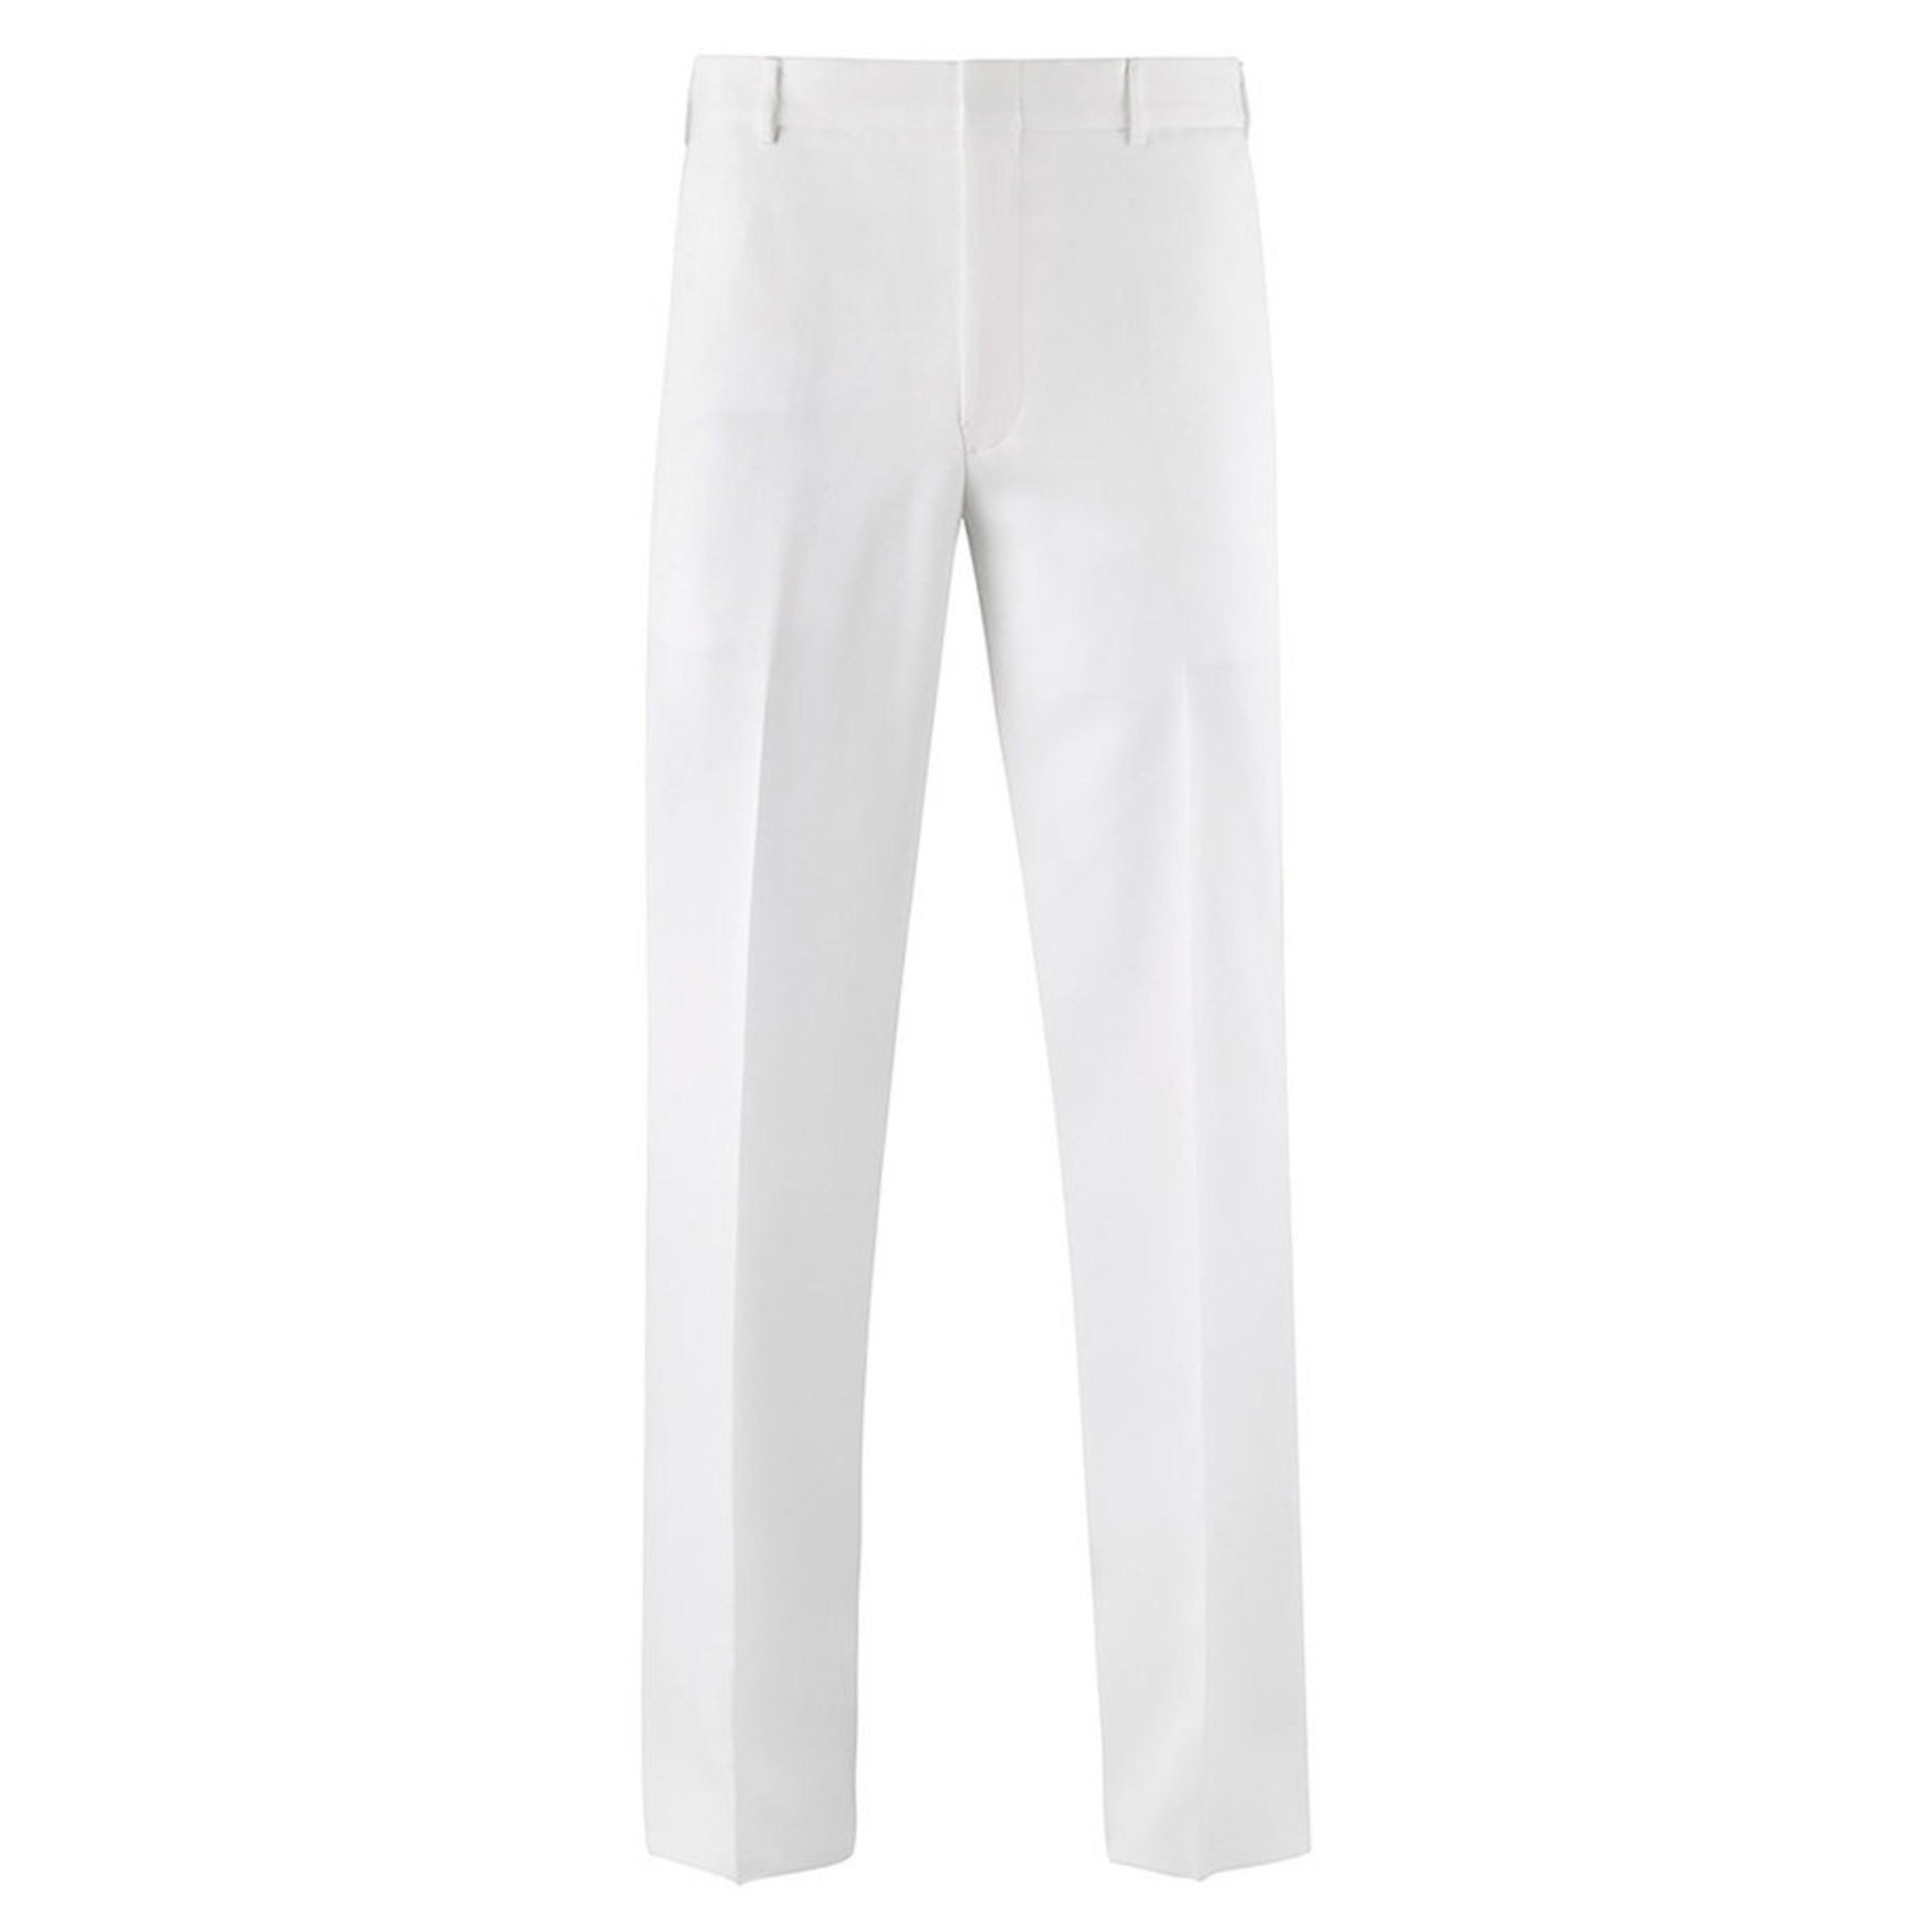 Men's Summer White Trousers, Classic Fit | Summer White | Military ...